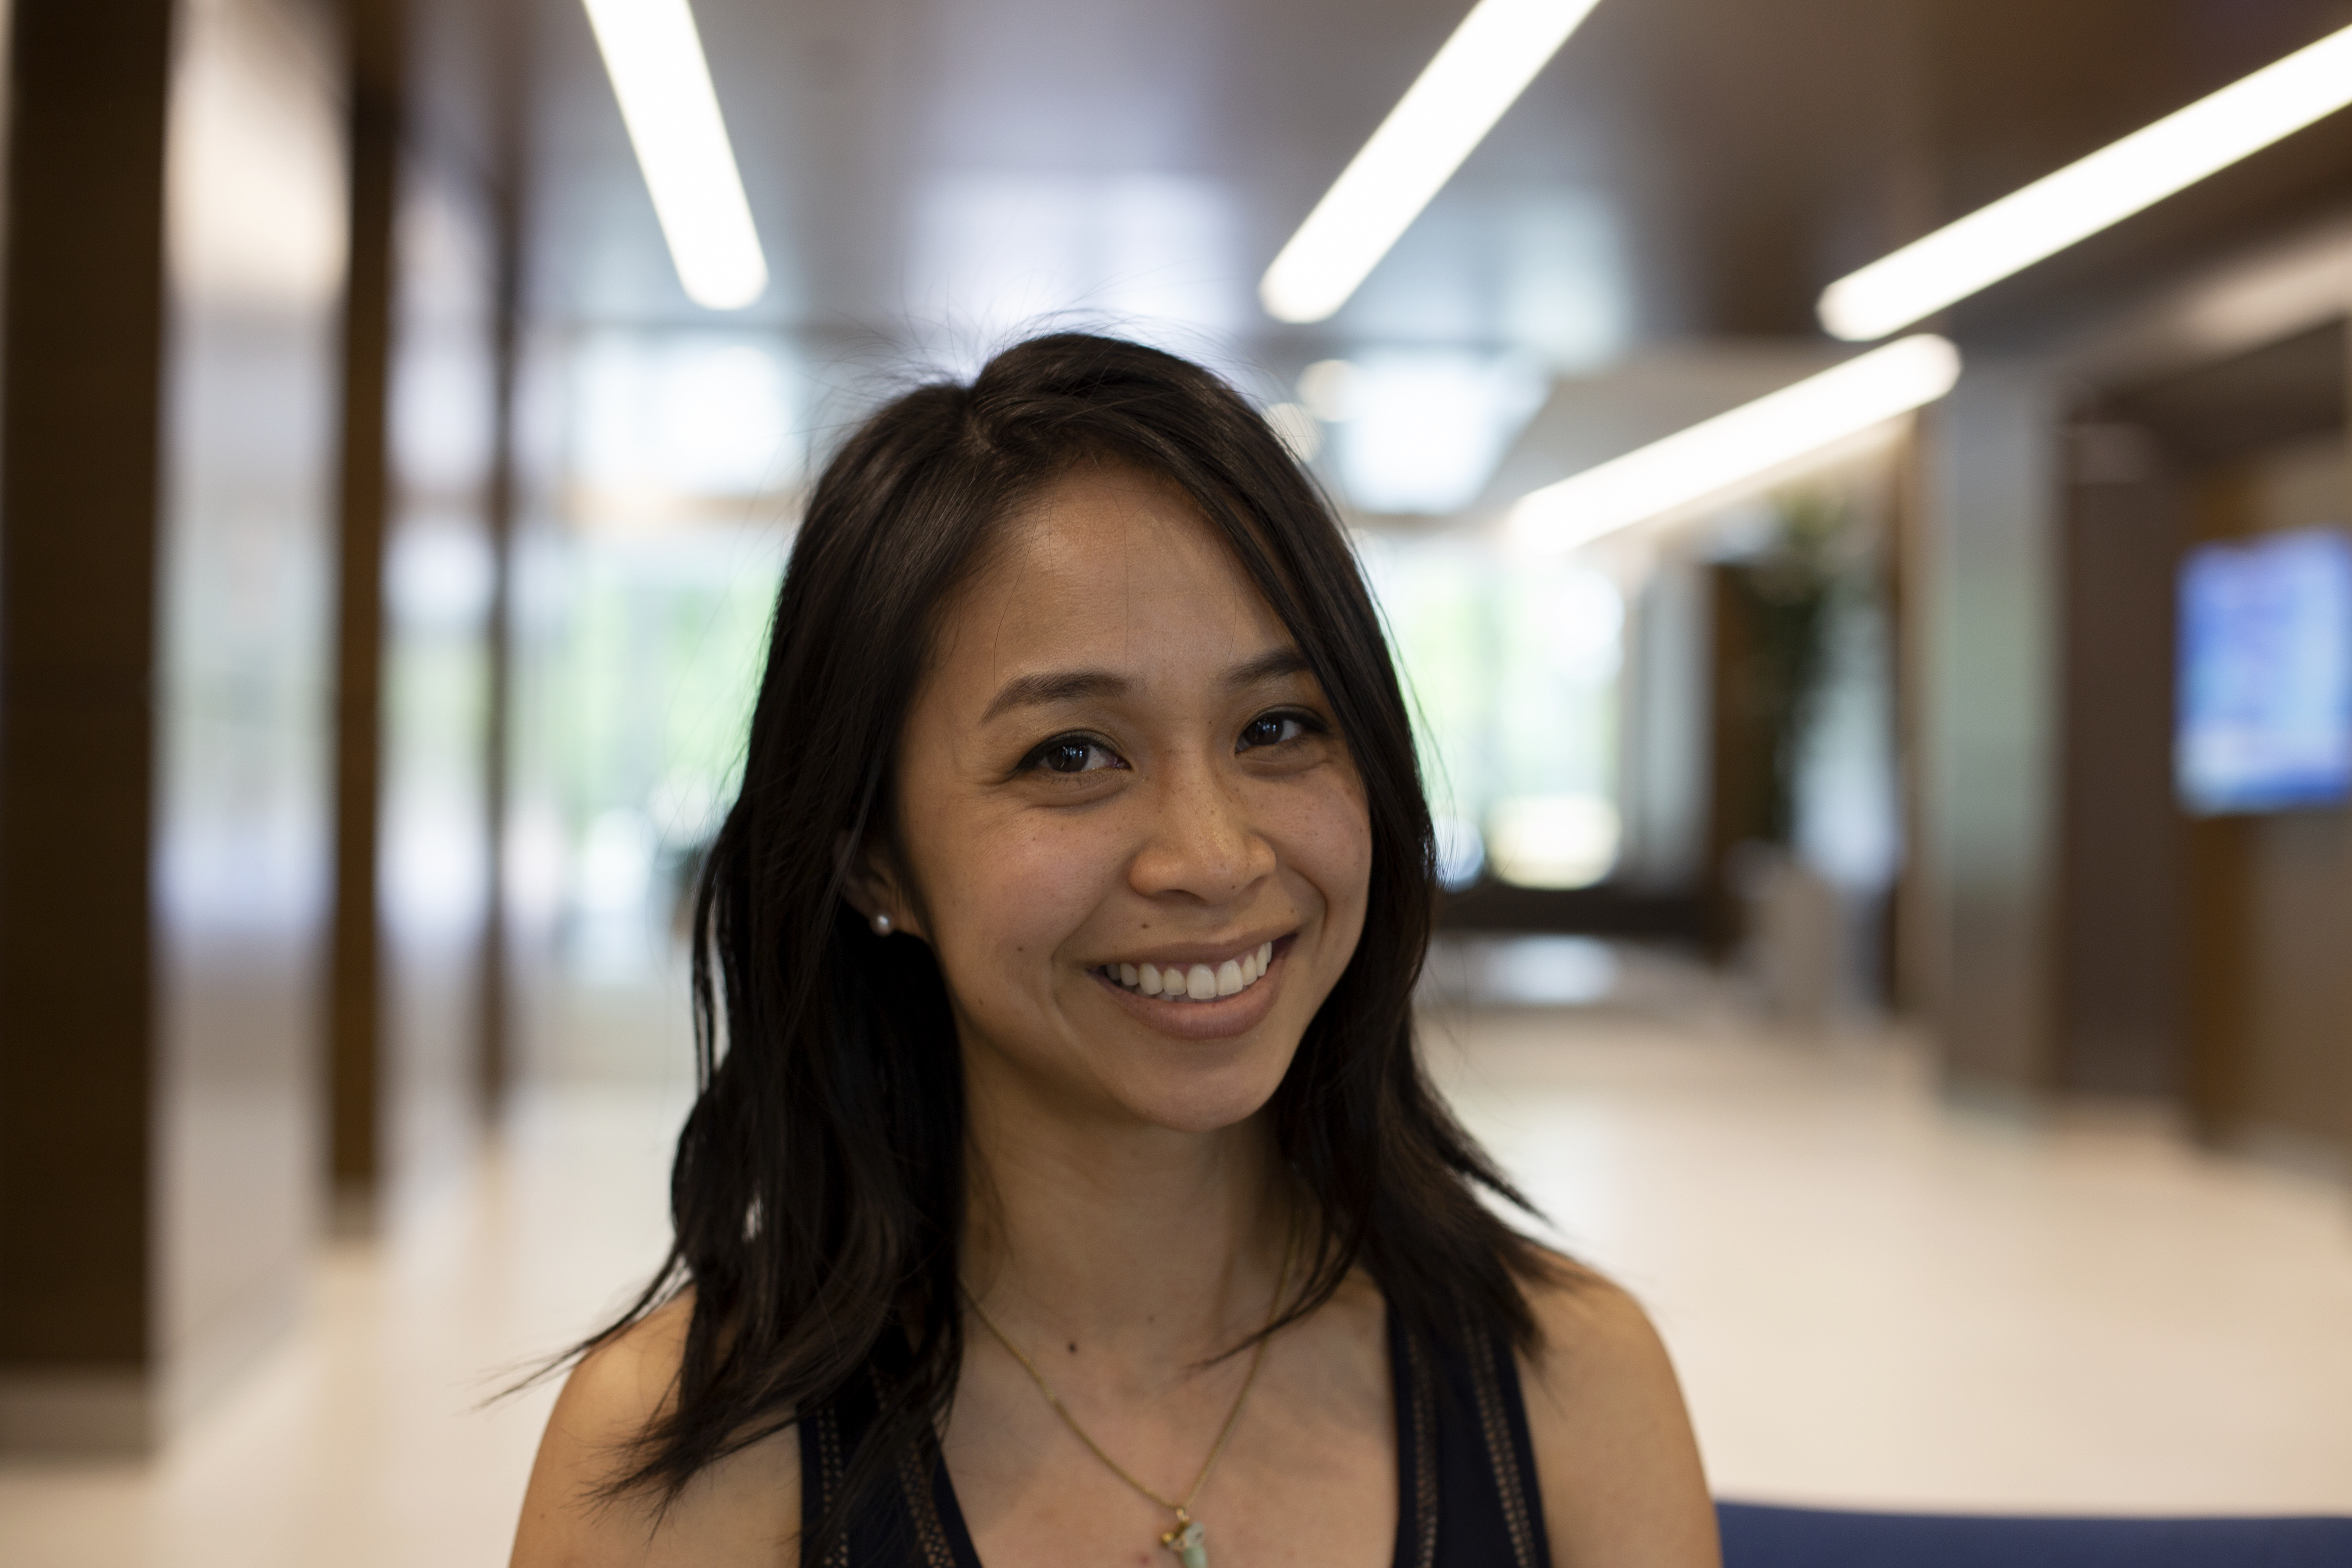 Stacey Kuo, MS’15 is an SQA Engineer at Align Technology